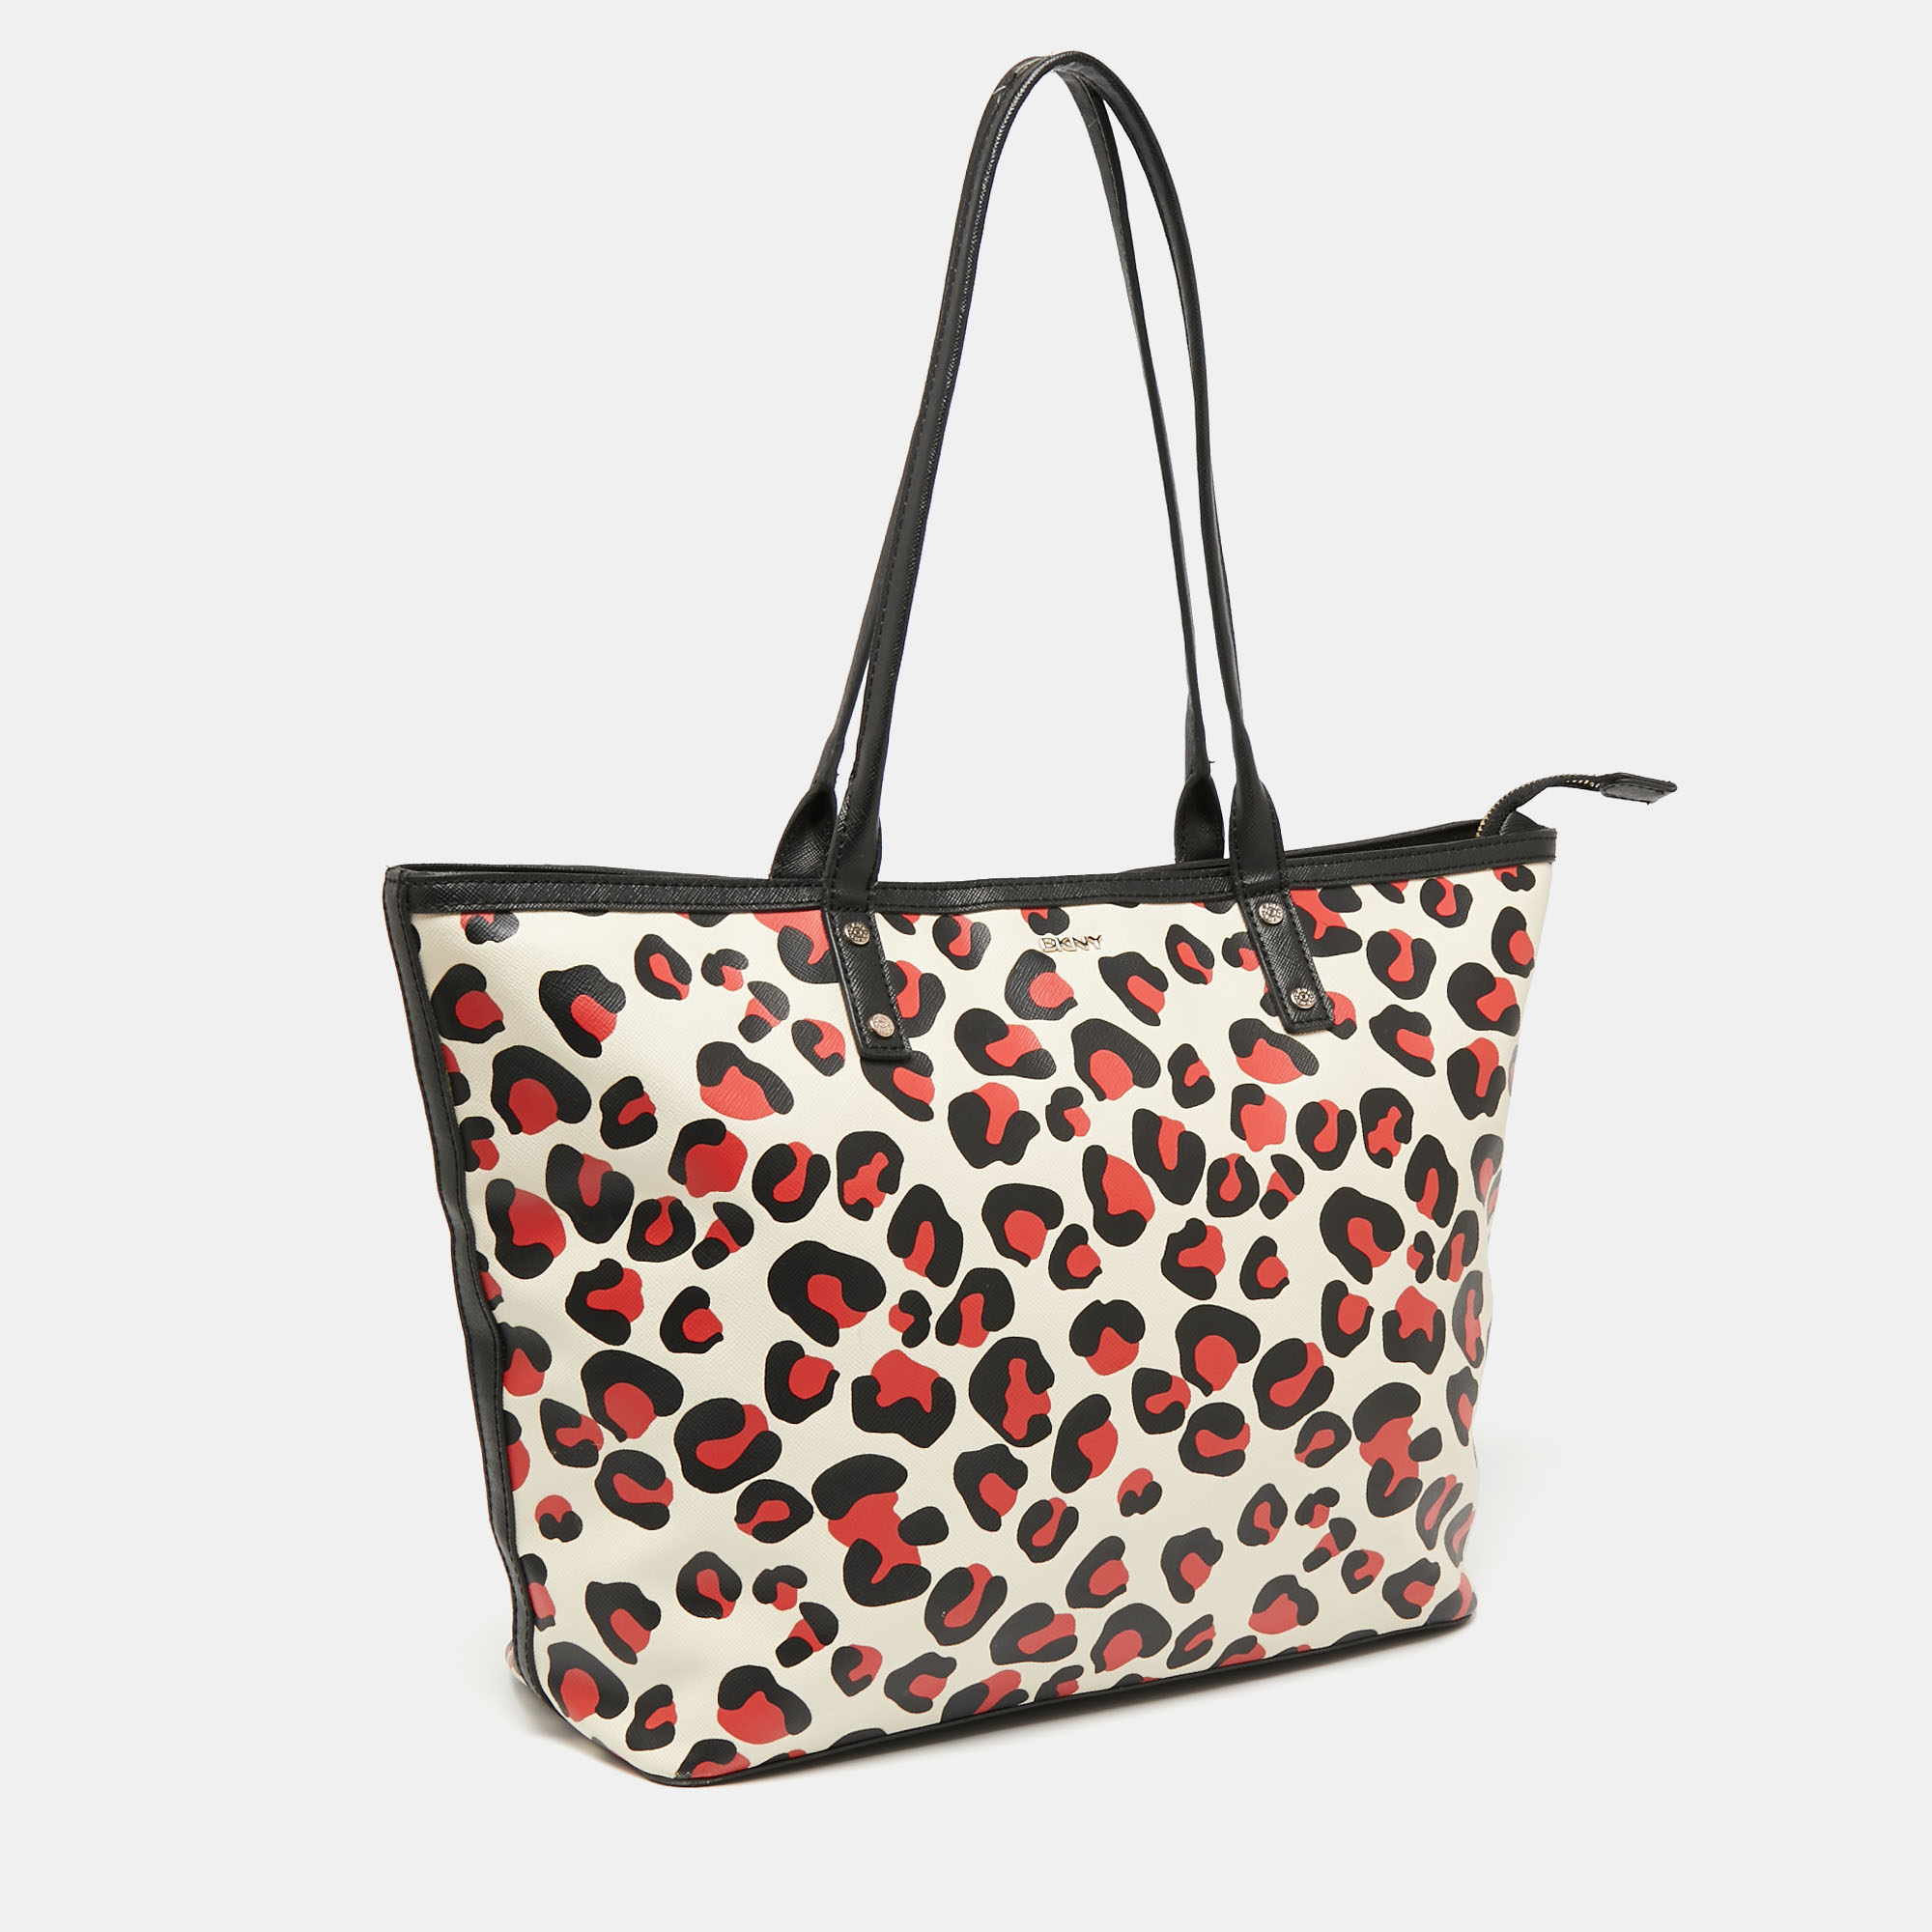 Dkny Black/Red Leopard Print Coated Canvas Zip Tote